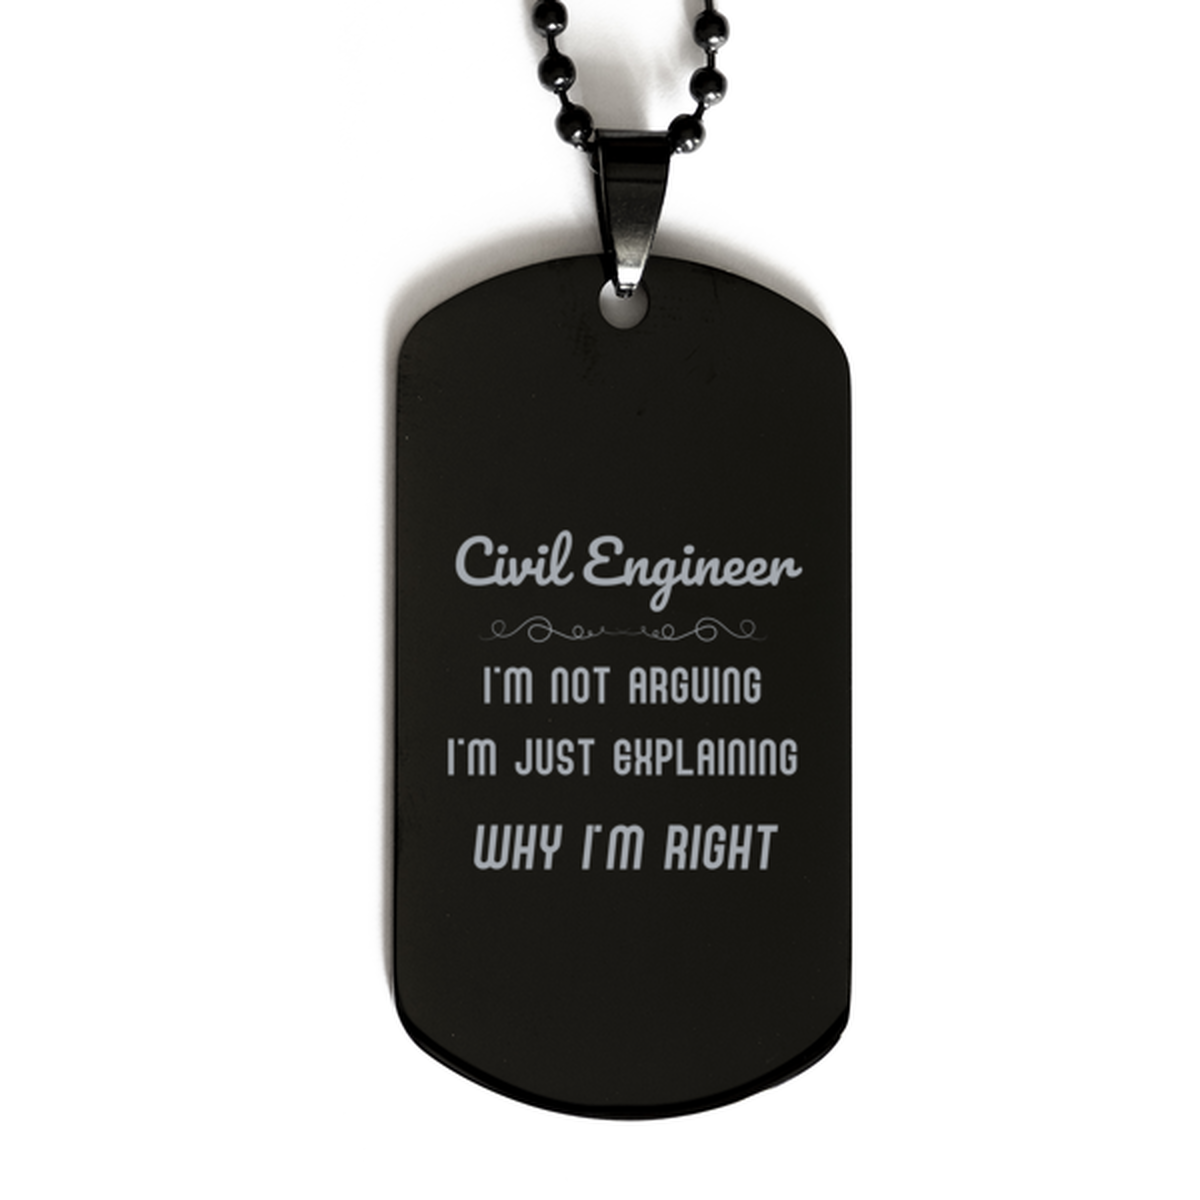 Civil Engineer I'm not Arguing. I'm Just Explaining Why I'm RIGHT Black Dog Tag, Funny Saying Quote Civil Engineer Gifts For Civil Engineer Graduation Birthday Christmas Gifts for Men Women Coworker